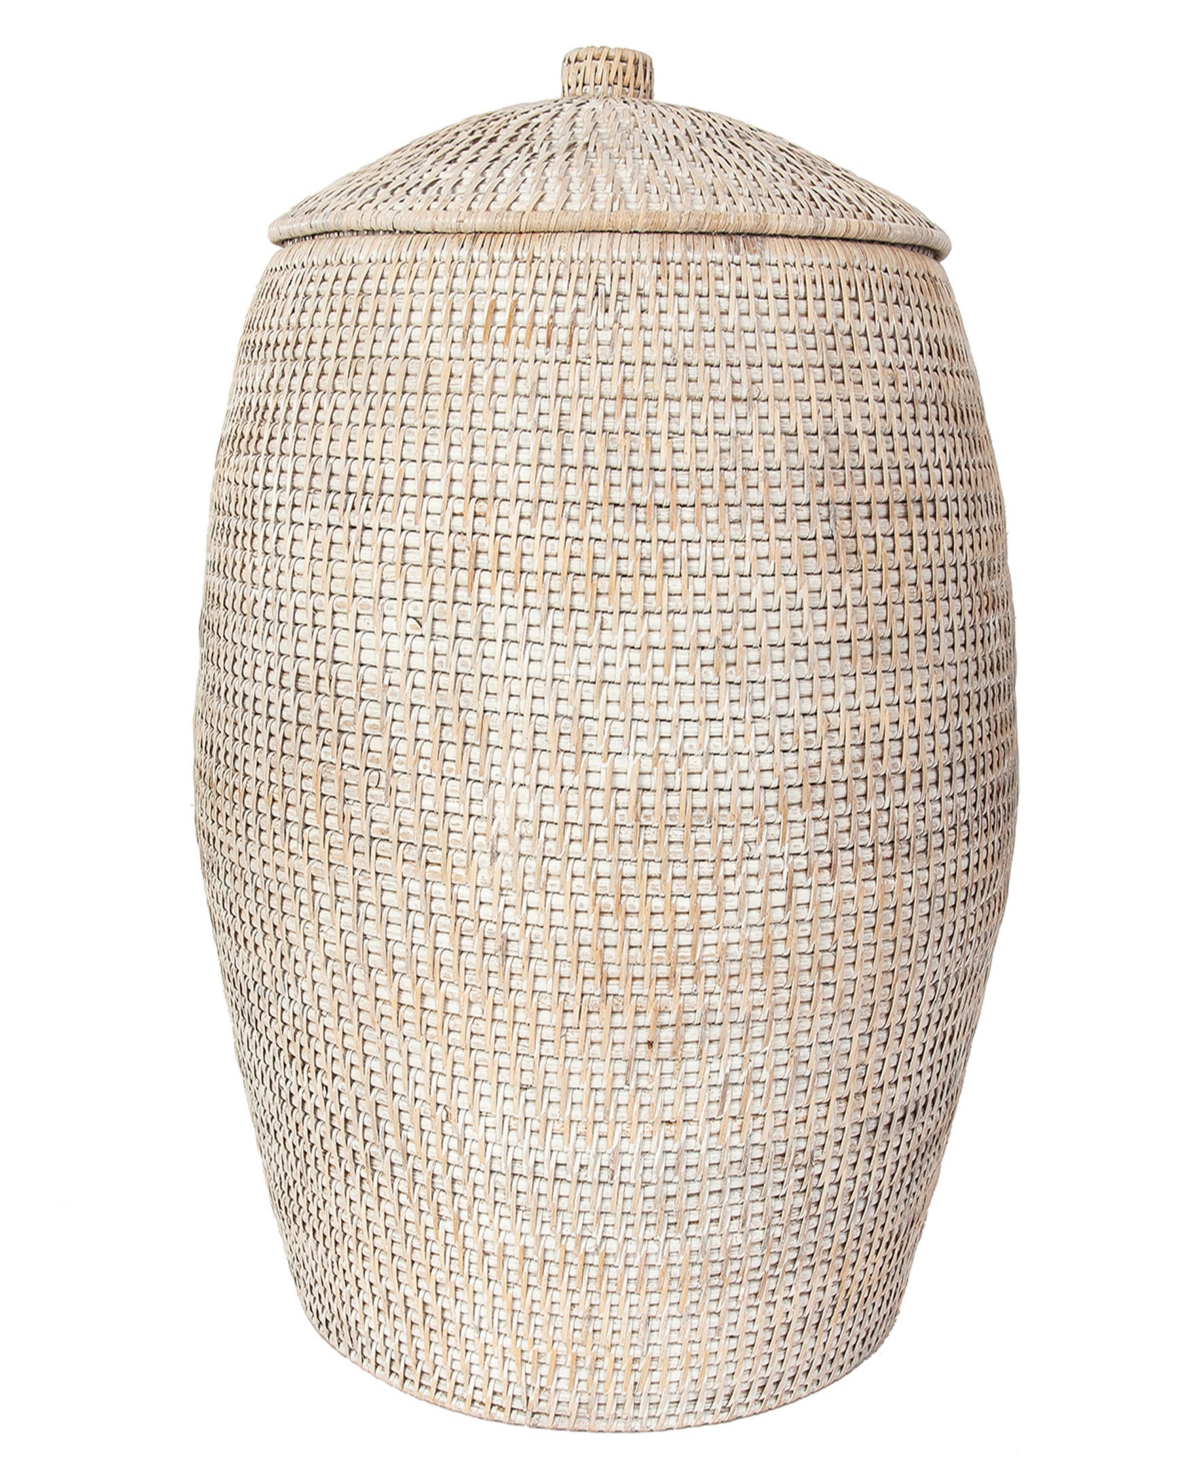 Saboga Home Beehive Laundry Hamper with Liner - White Wash